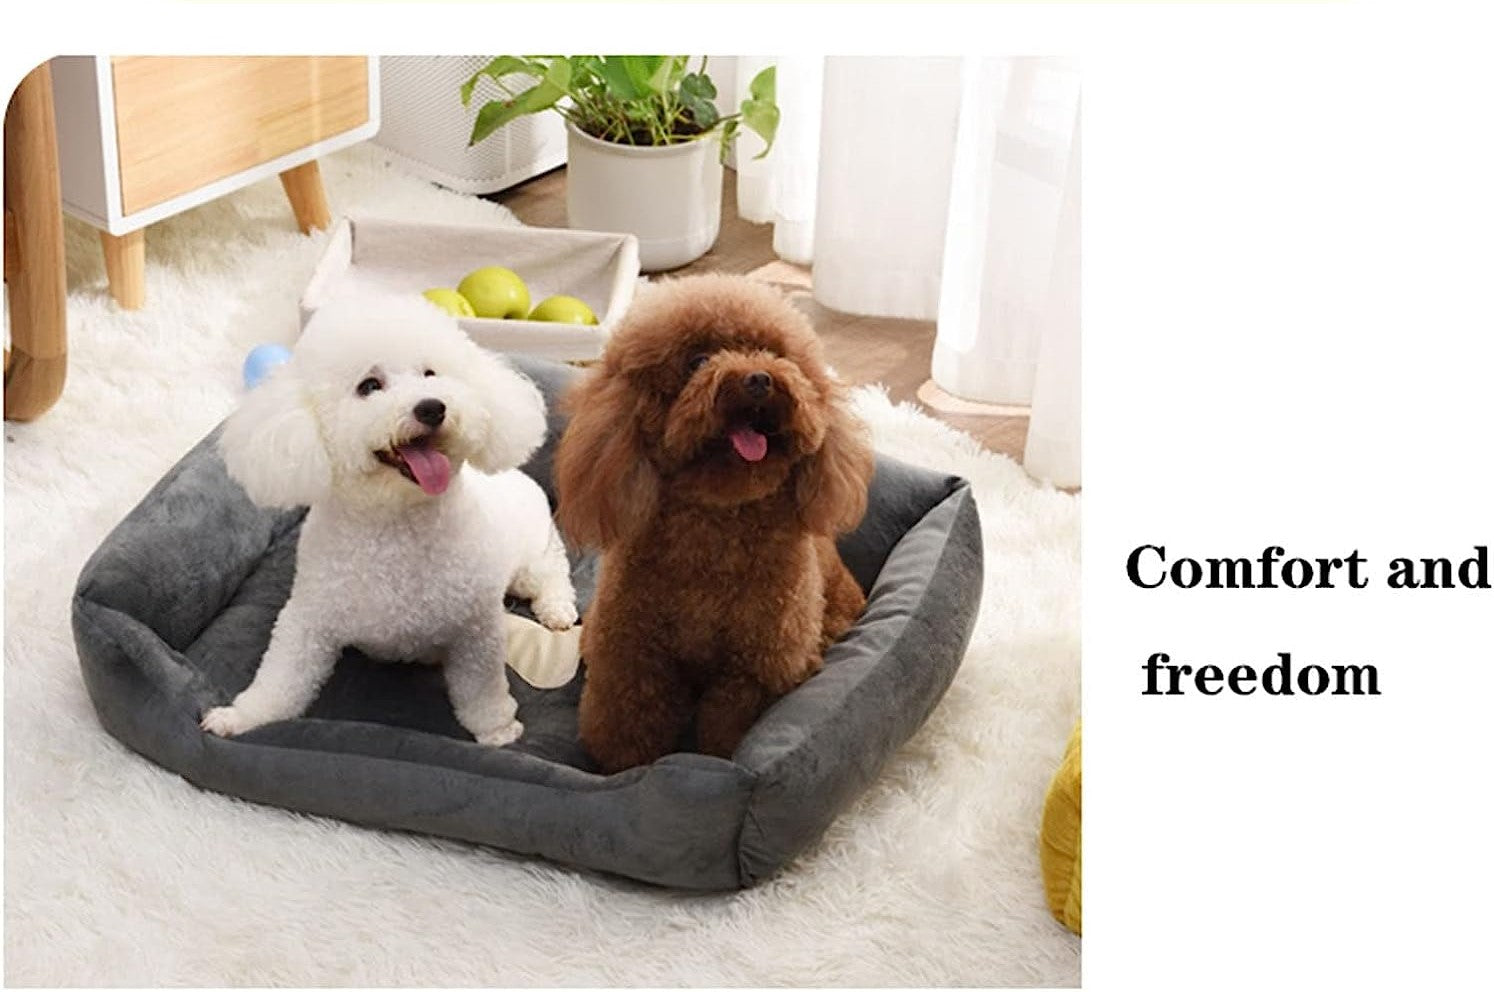 Super Soft Dog Bed with Waterproof Bottom - Warm Bed/Sofa For Dog & Cat - Grey & Black